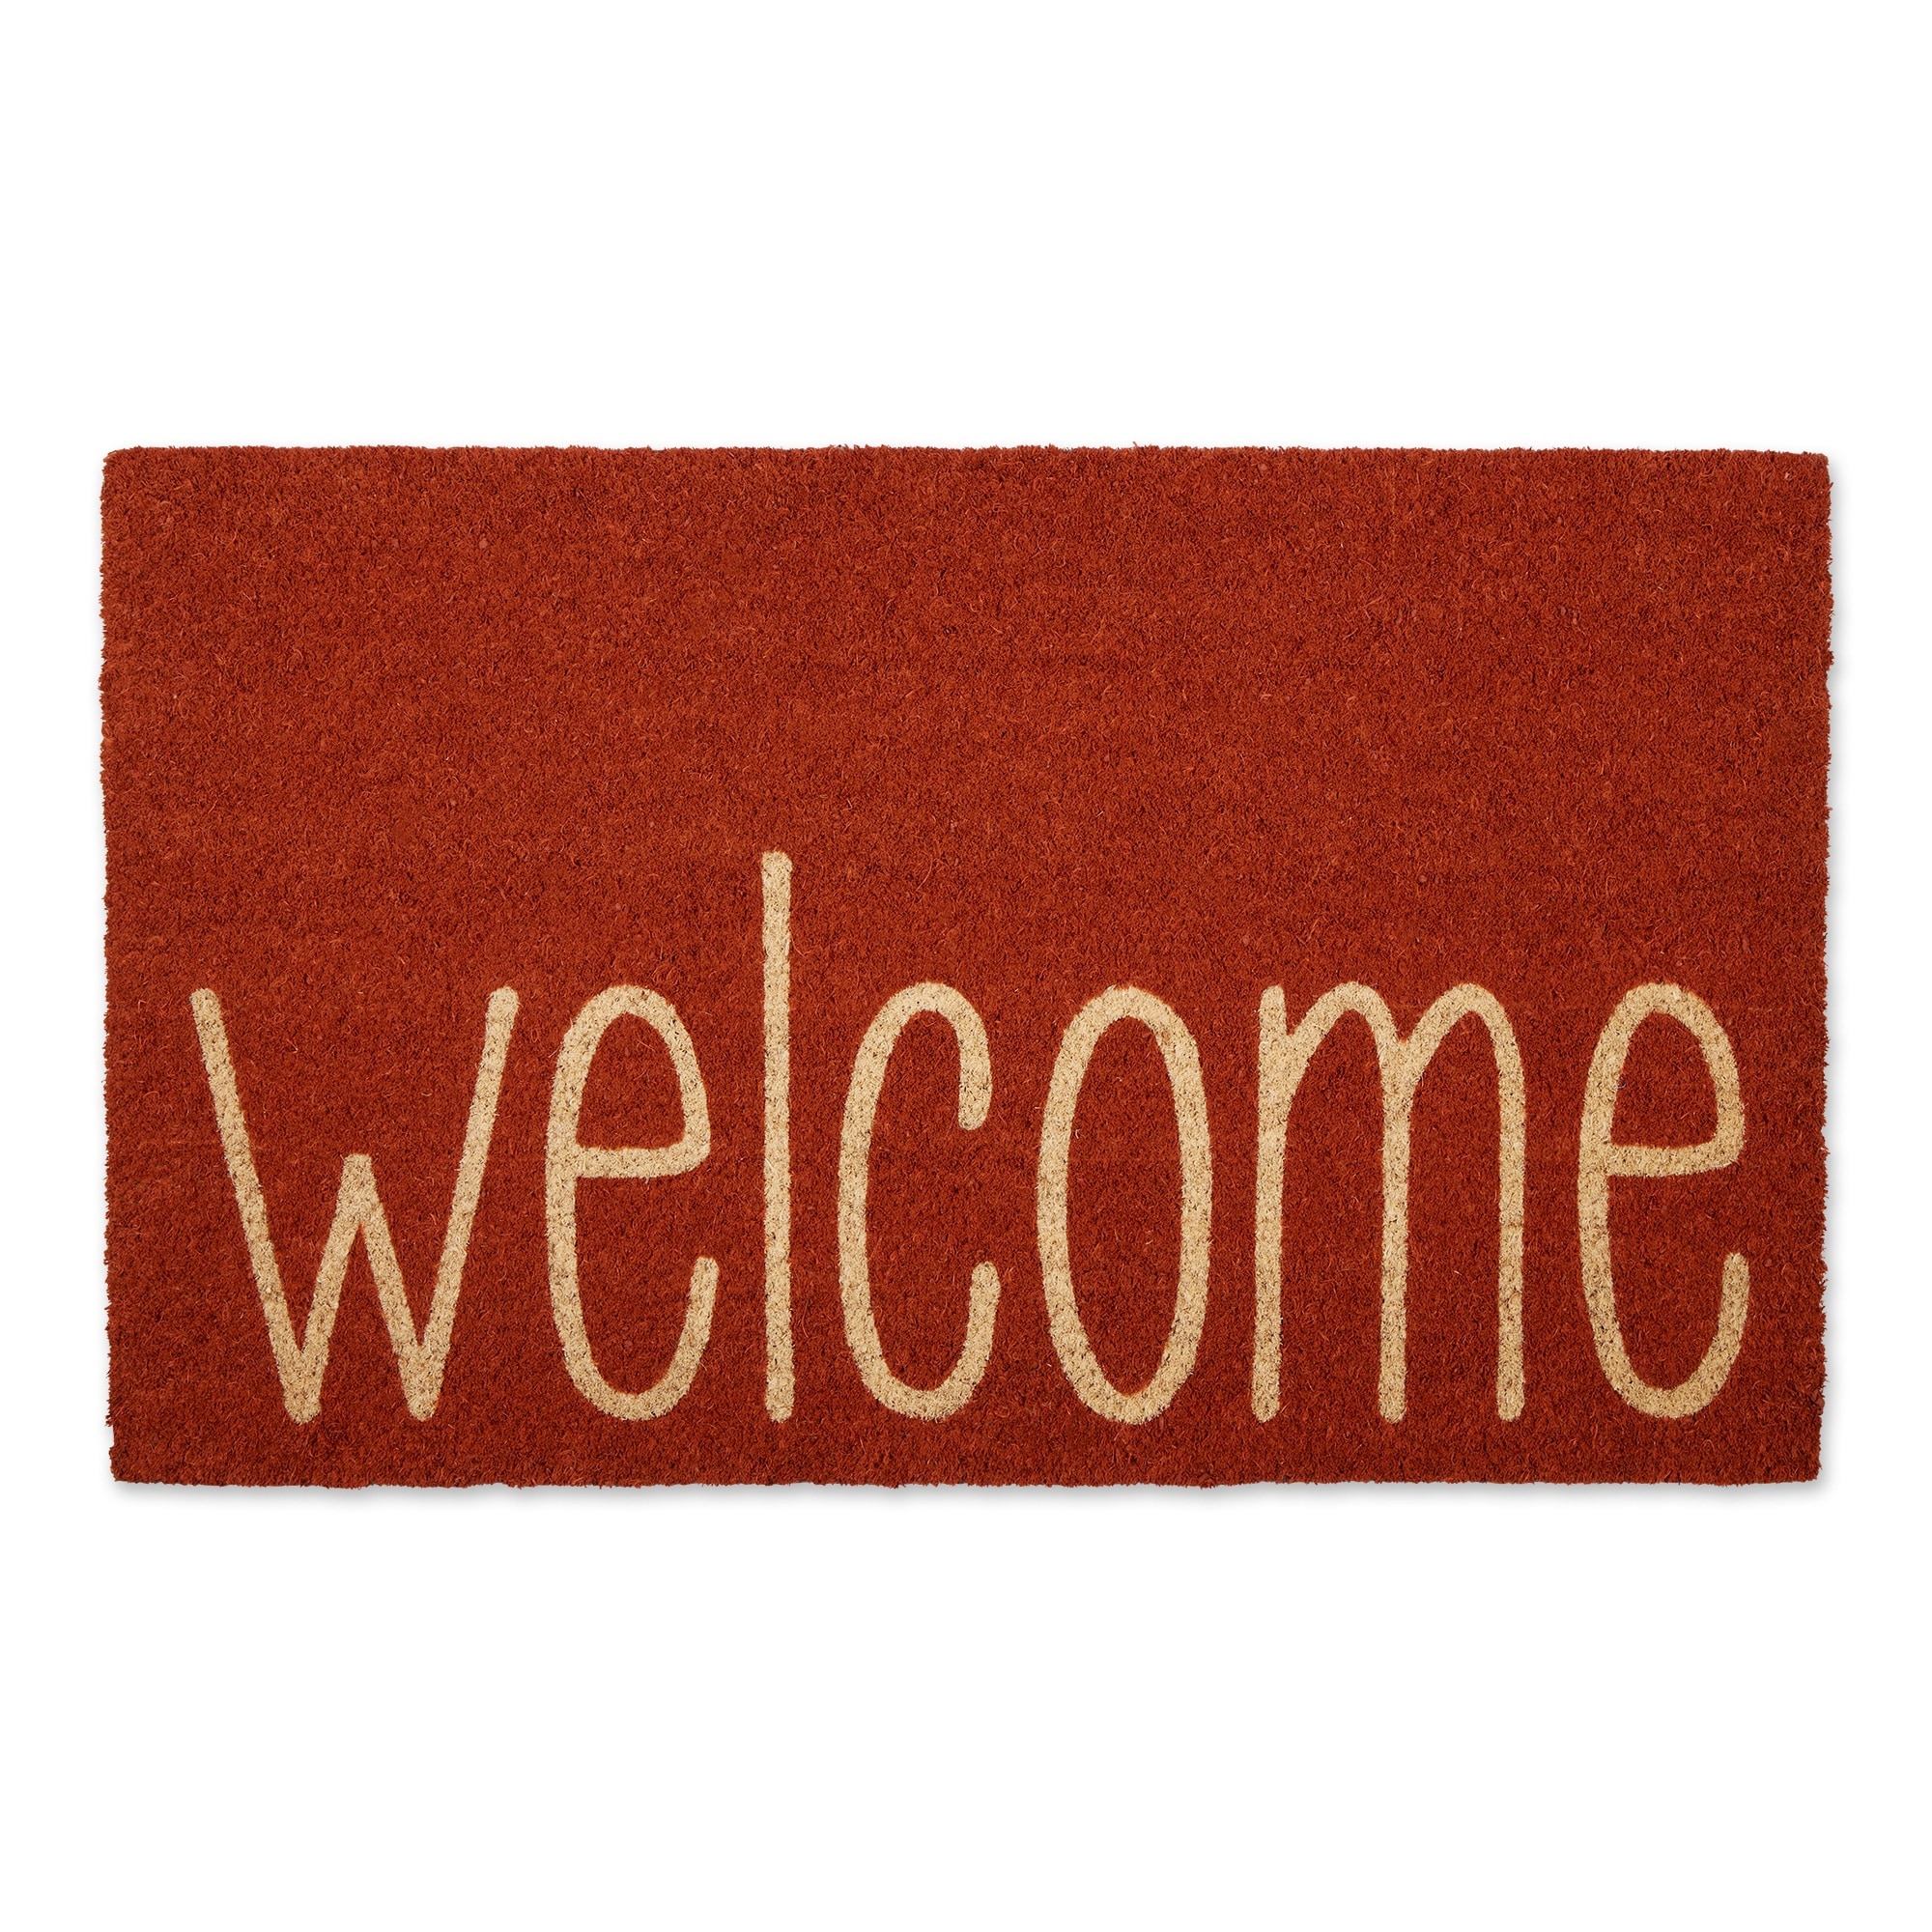 DII Damask Welcome Mat - On Sale - Bed Bath & Beyond - 30268009